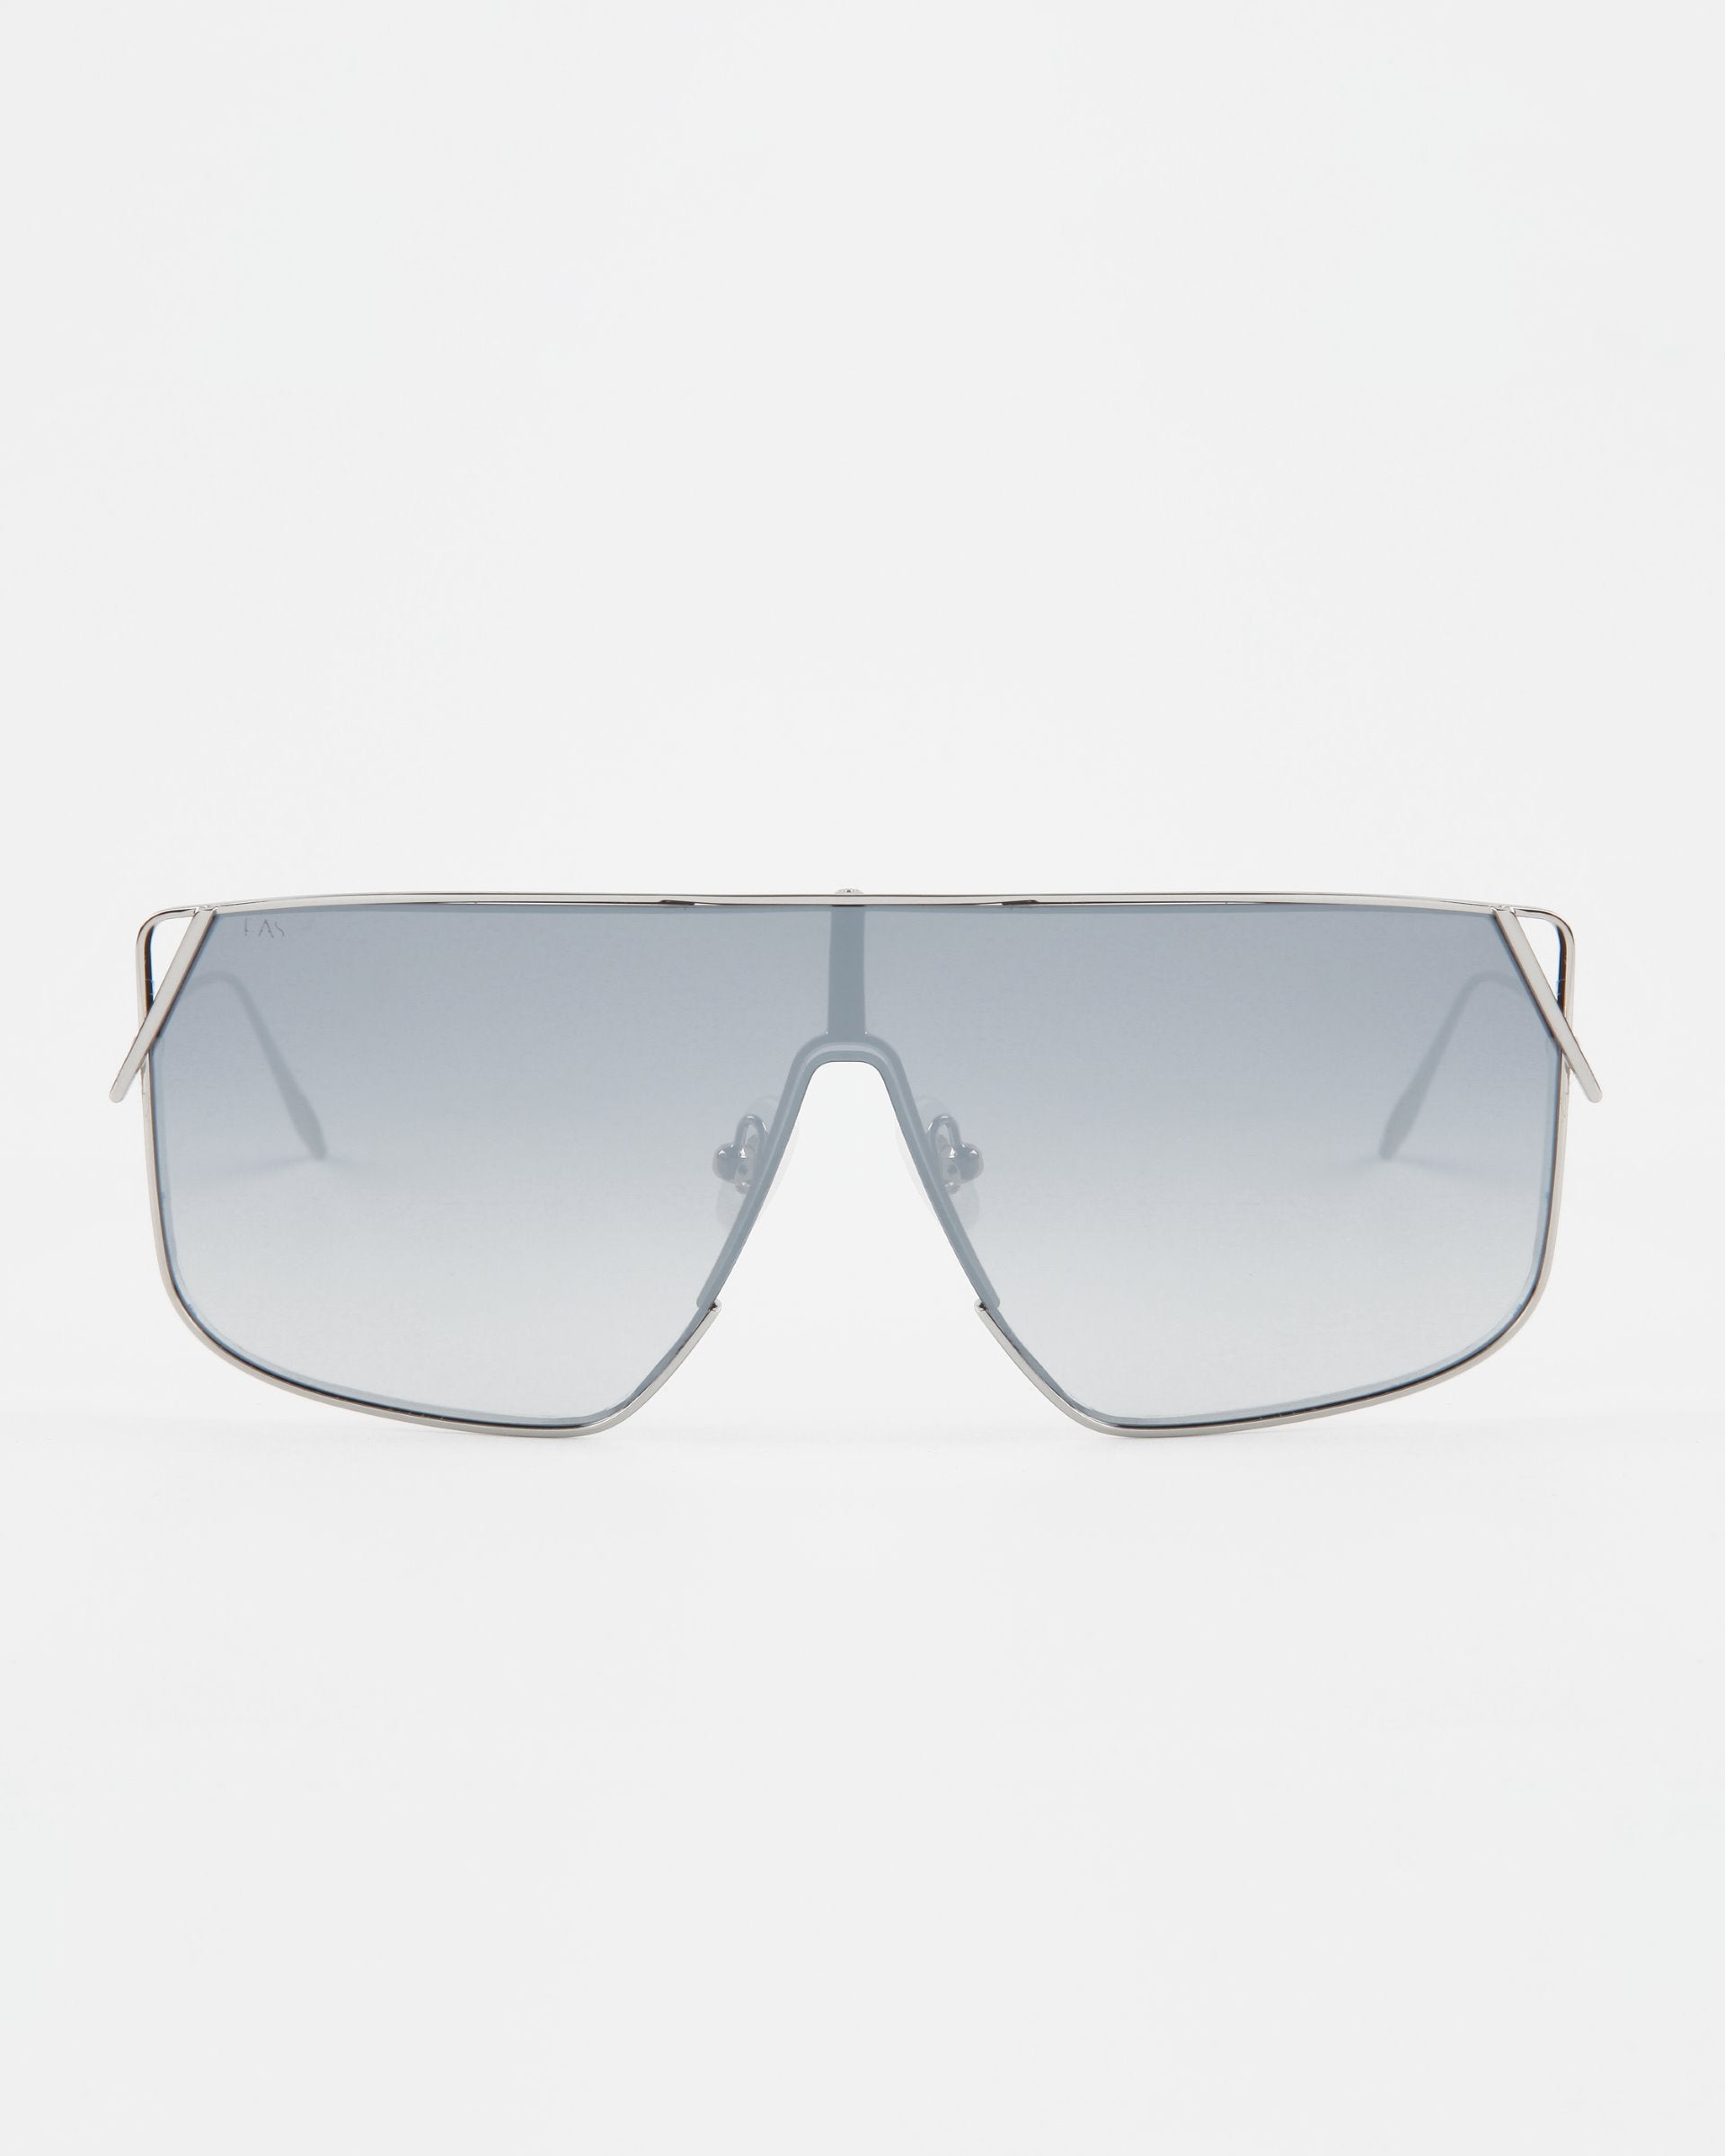 A pair of large, rectangular For Art's Sake® Horizon sunglasses with grey gradient lenses and slender stainless steel frames. The minimalist design features a double bridge, straight temple arms, and adjustable nosepads. These sunglasses offer full UVA & UVB protection on a plain white background.